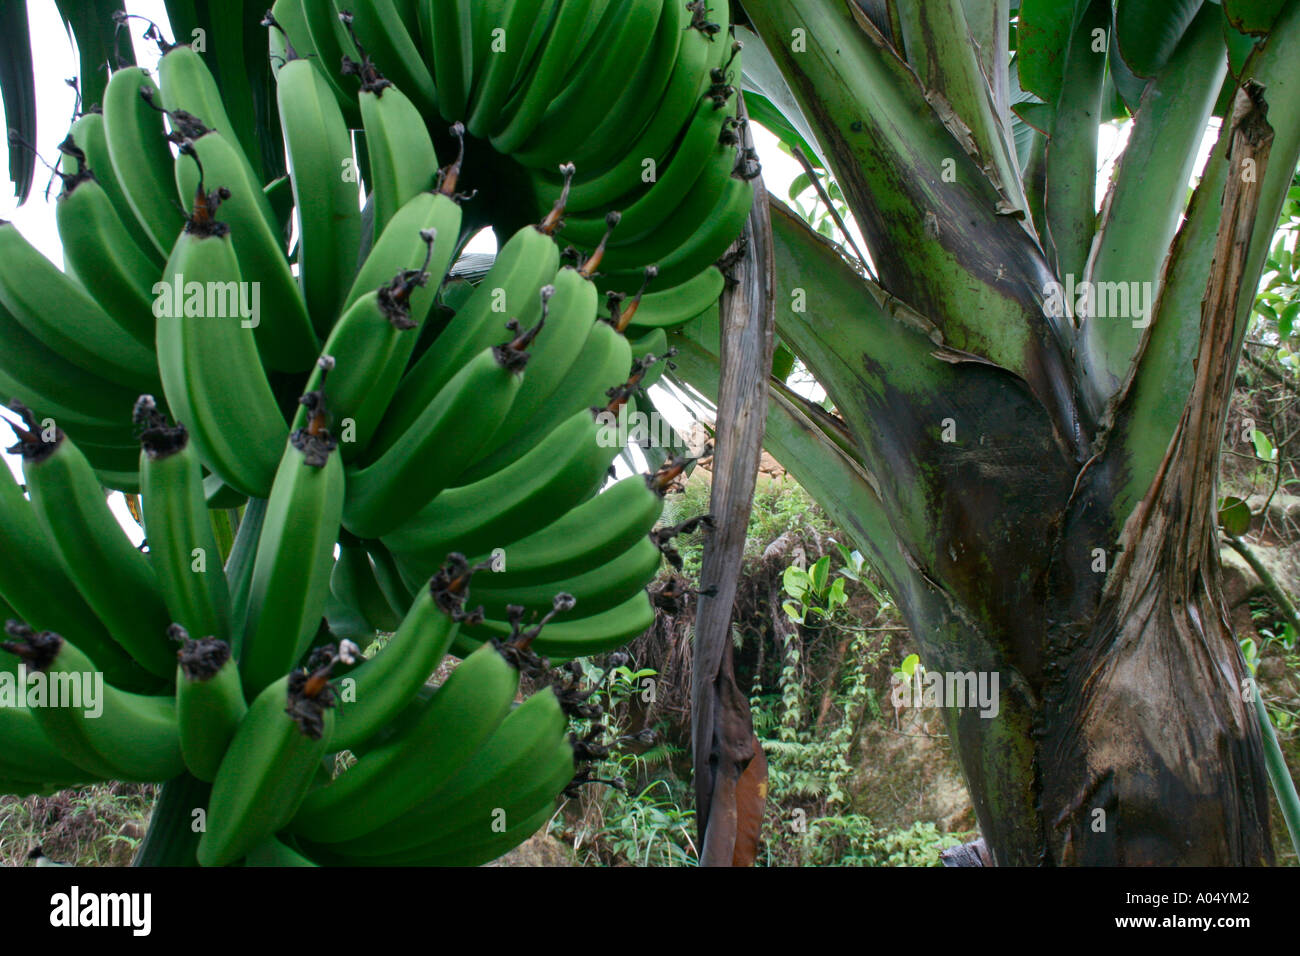 Stalk of raw banana hanging by the plantain Stock Photo